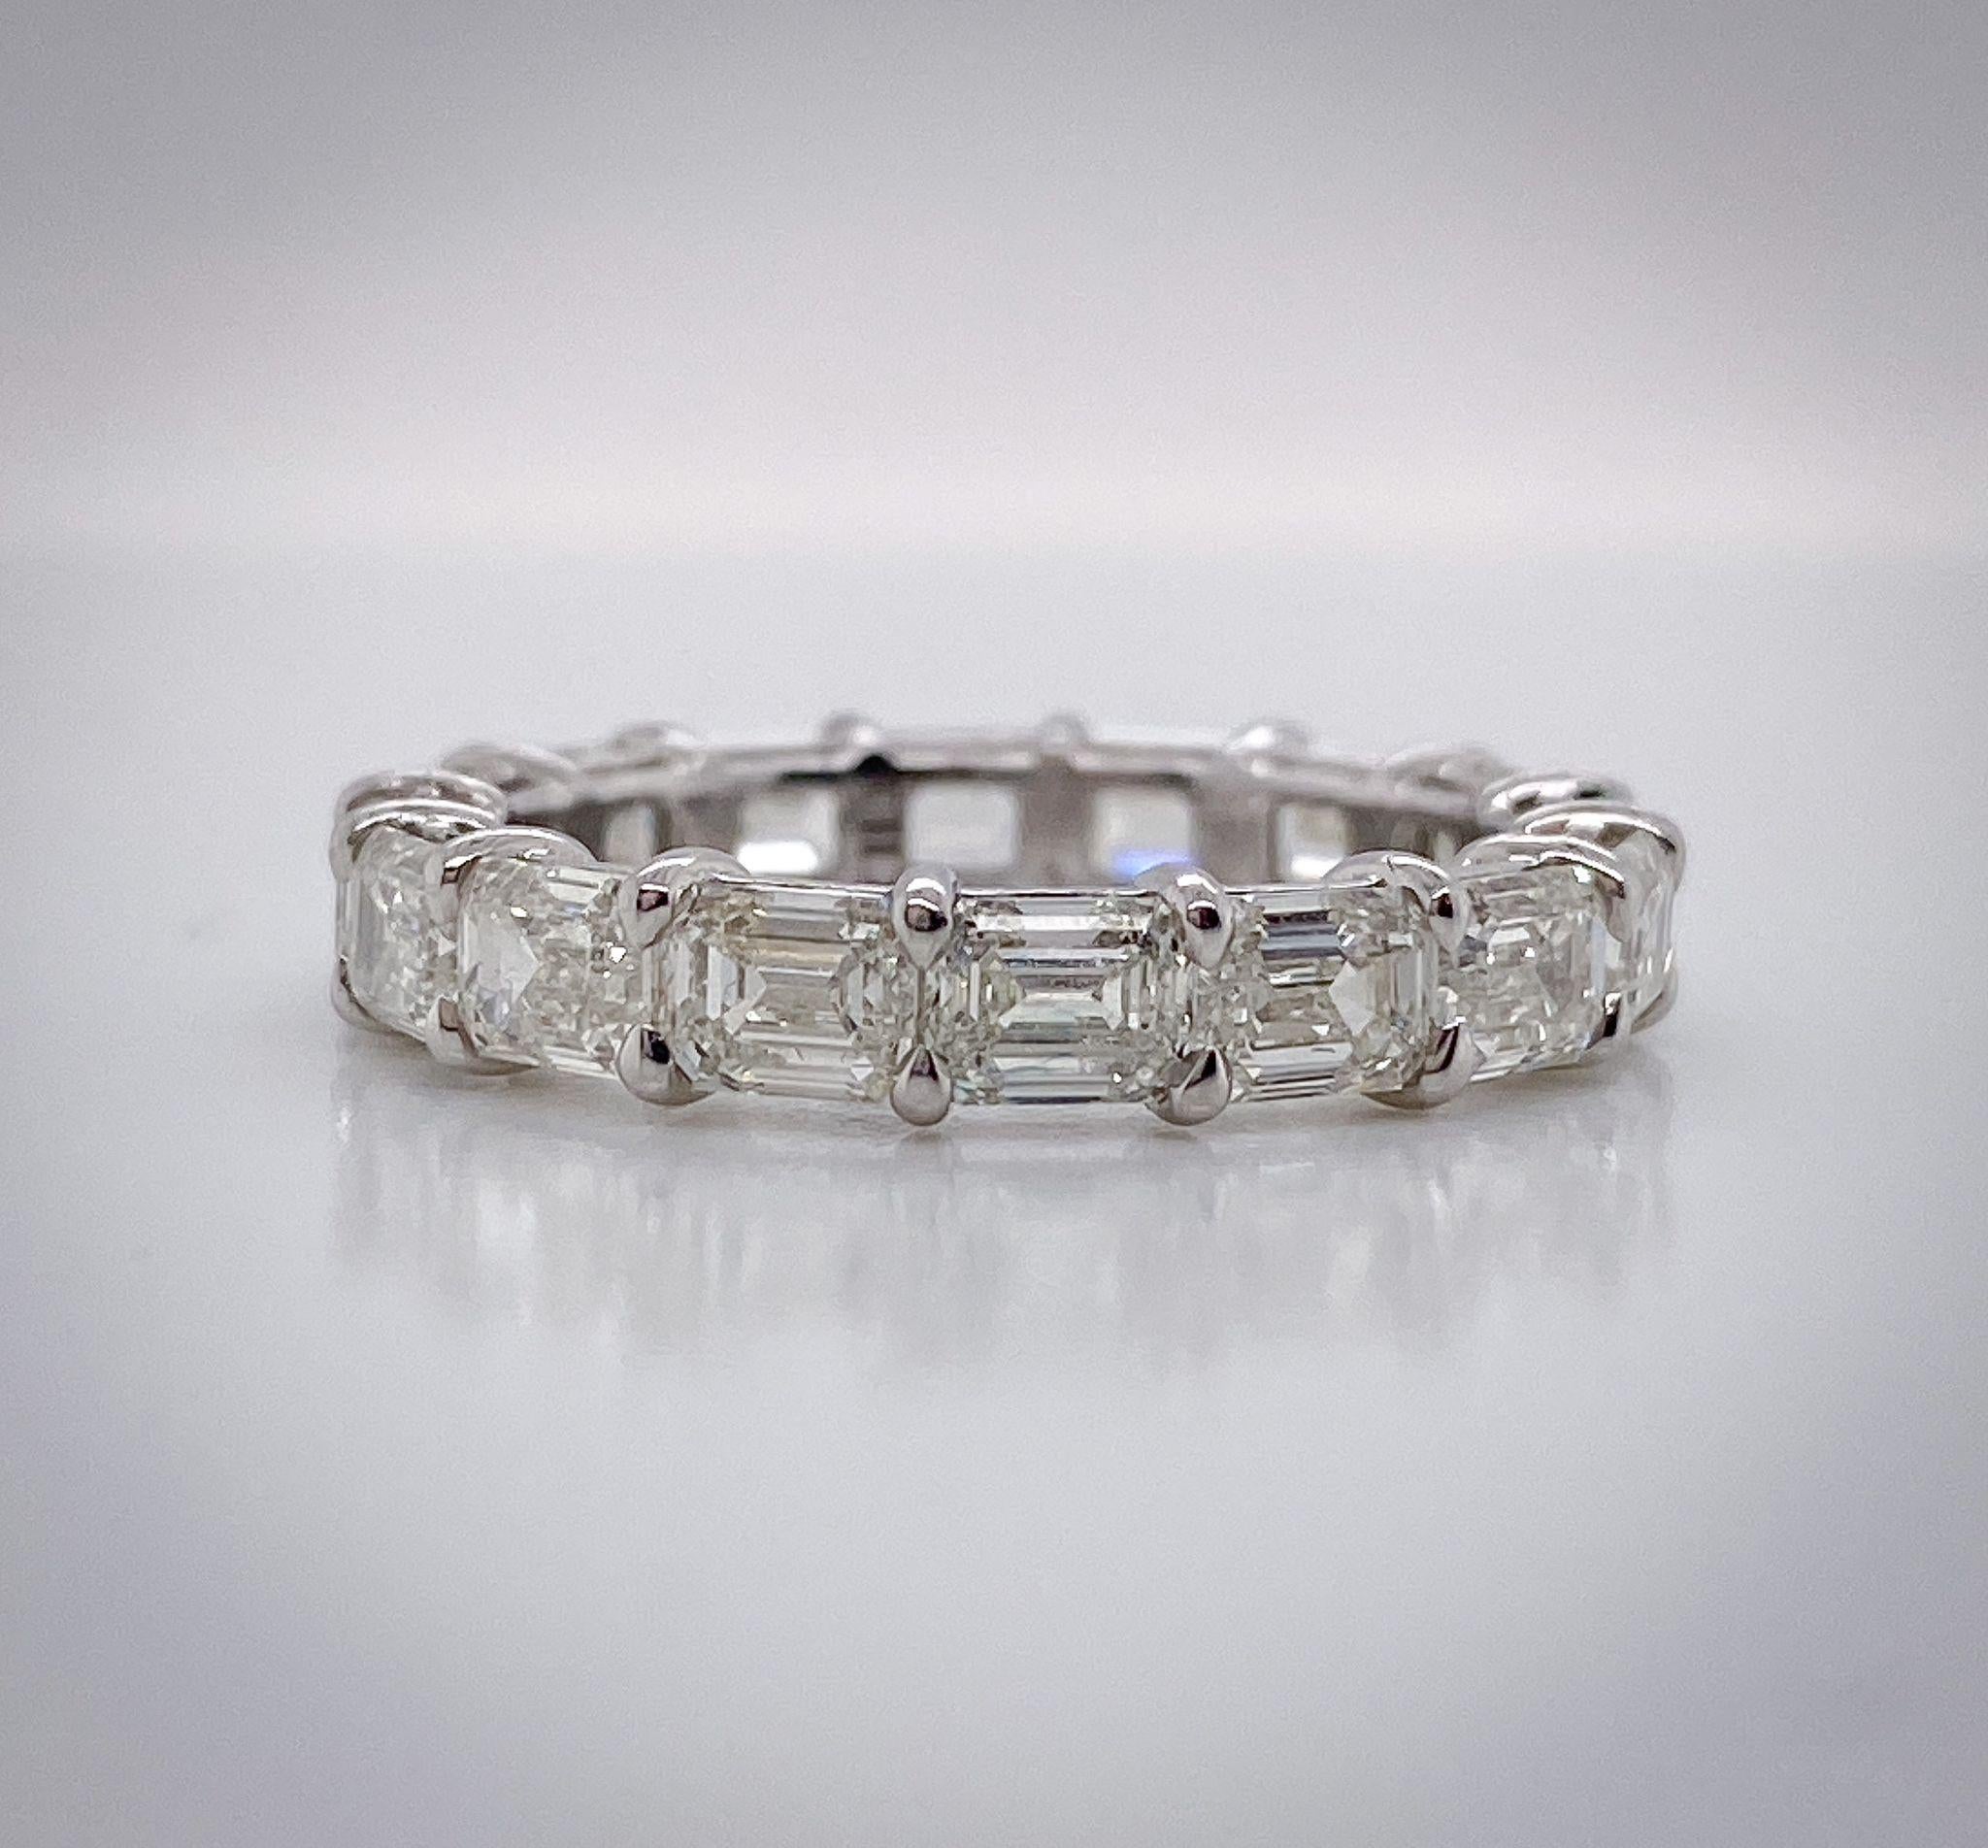 This Emerald Cut Horizontal Eternity Band features 16 Emerald Cut Diamonds, weighing 4.85 Total Carat Weight. The stones are I Color, and VS Clarity. The stones are set Horizontally in a Platinum, Shared Prong Setting. 

Need a different finger